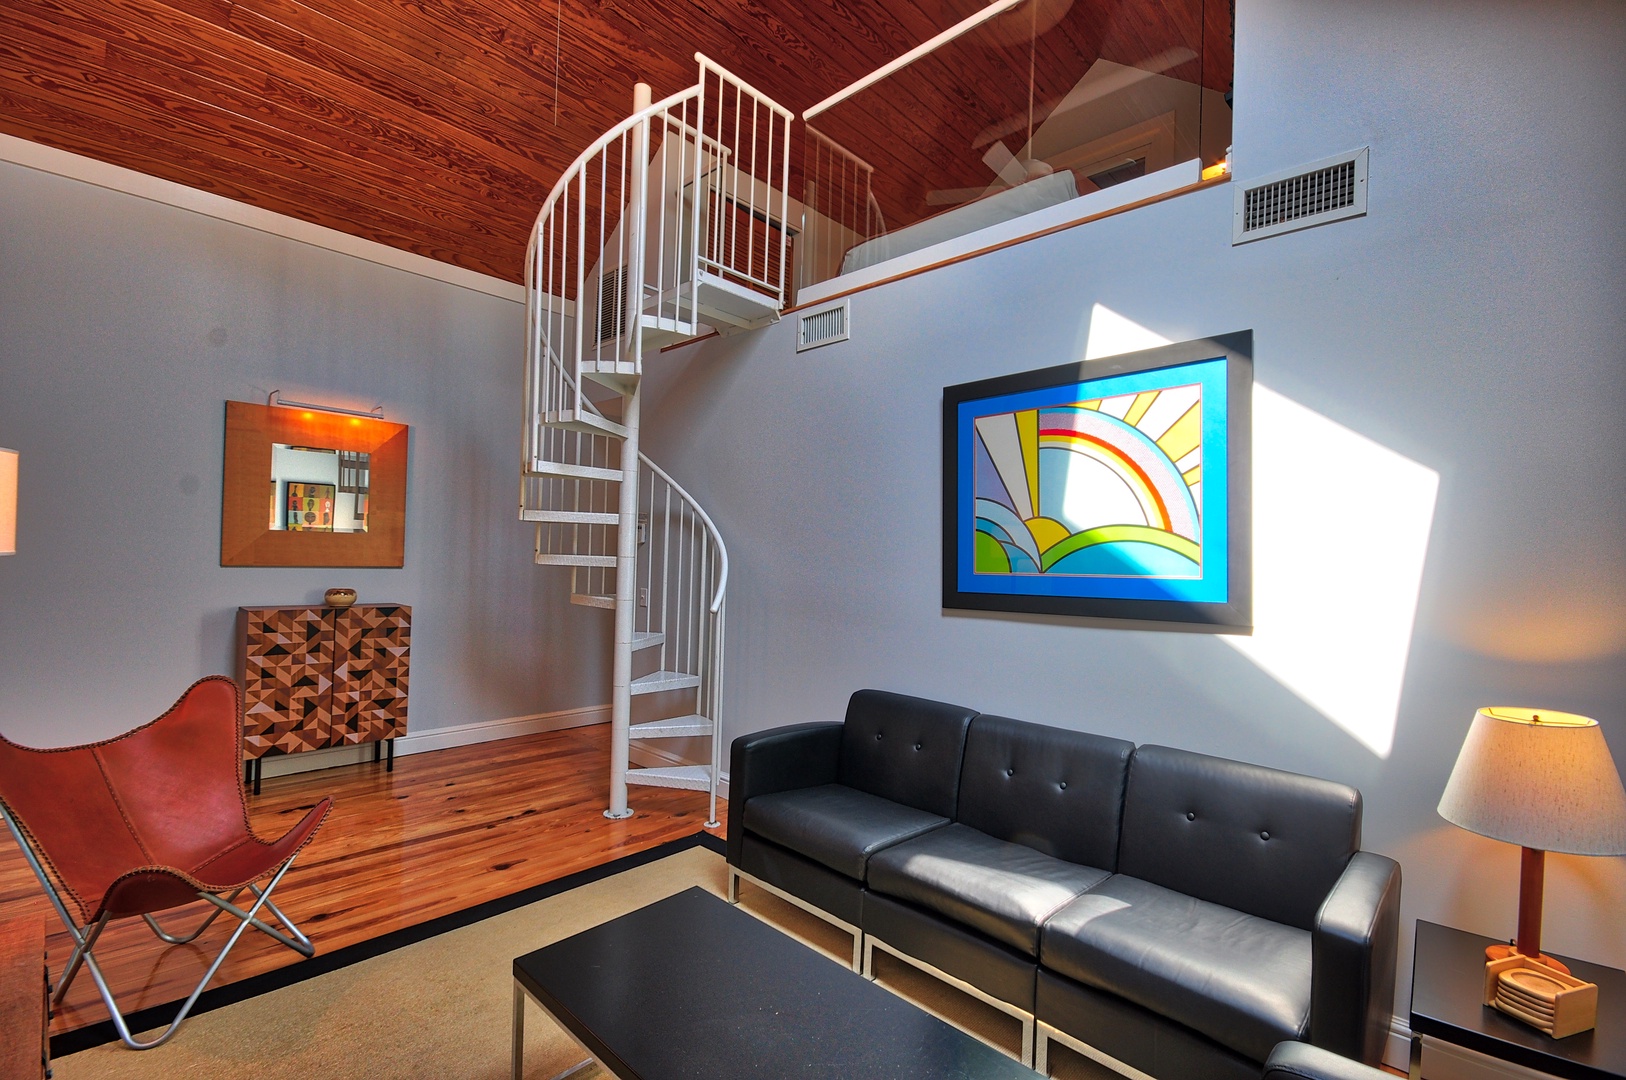 Living Room with Spiral Staircase to Loft